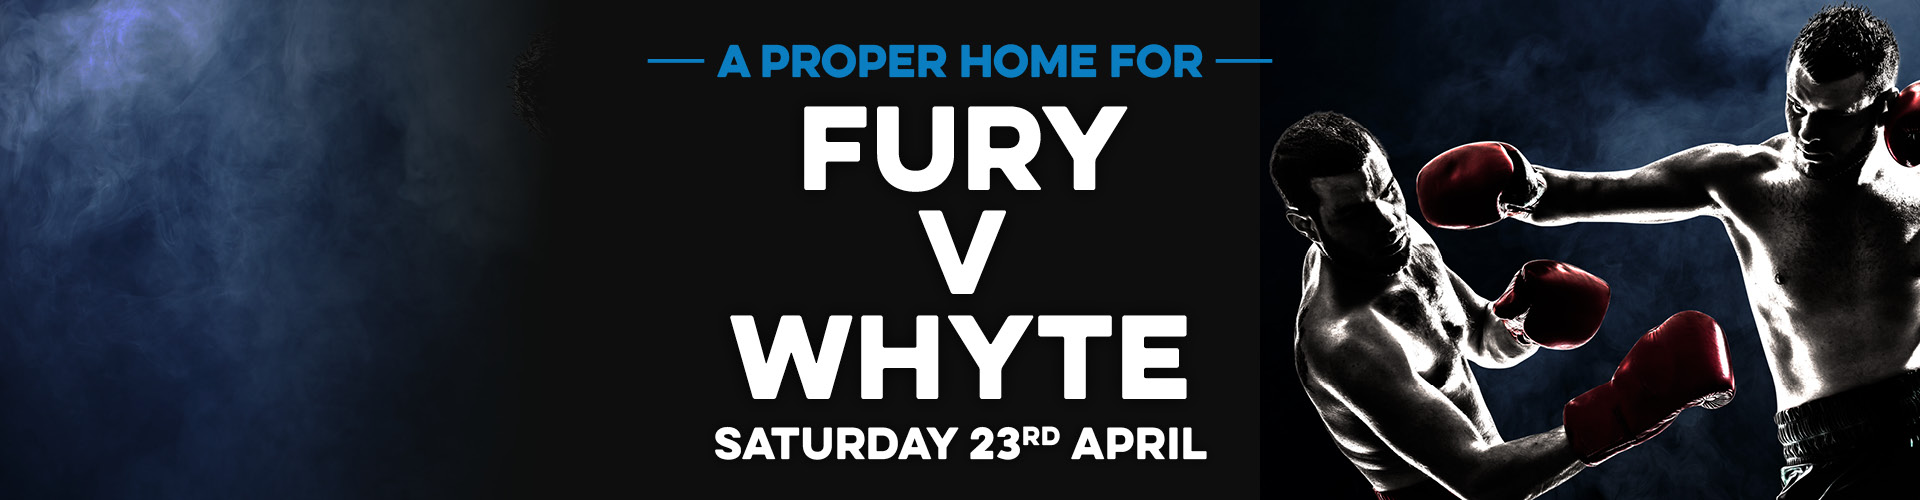 Watch Fury vs Whyte live in Manchester